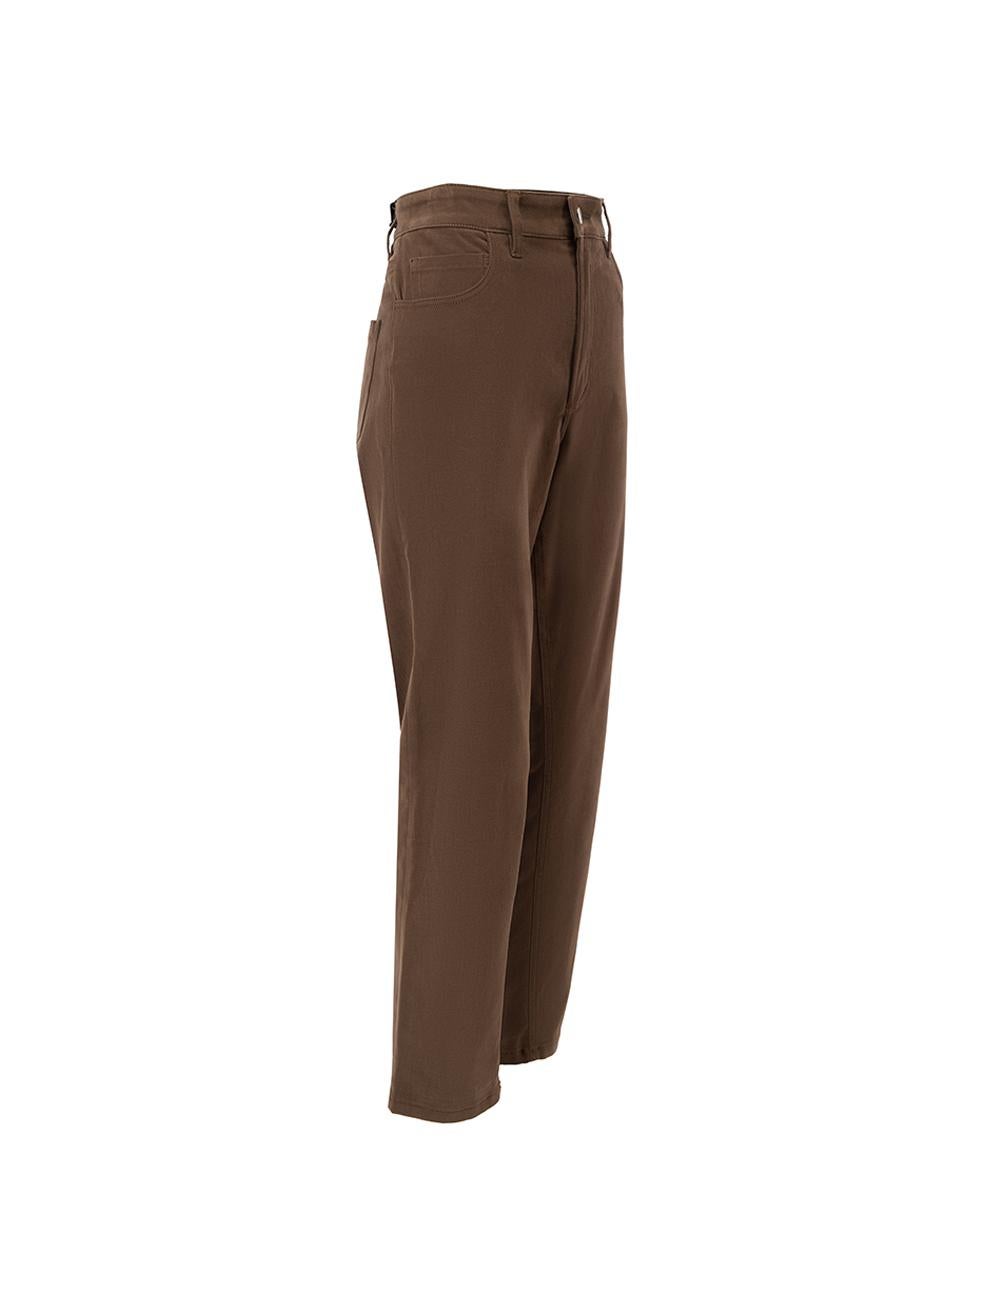 CONDITION is Very good. Hardly any visible wear to trousers is evident. Some loose threads along the top hem are on this Sanne designer sample item. 
 
 Details
  Designer sample item
 Brown
 Cotton
 Straight leg trousers
 Mid rise
 Front zip